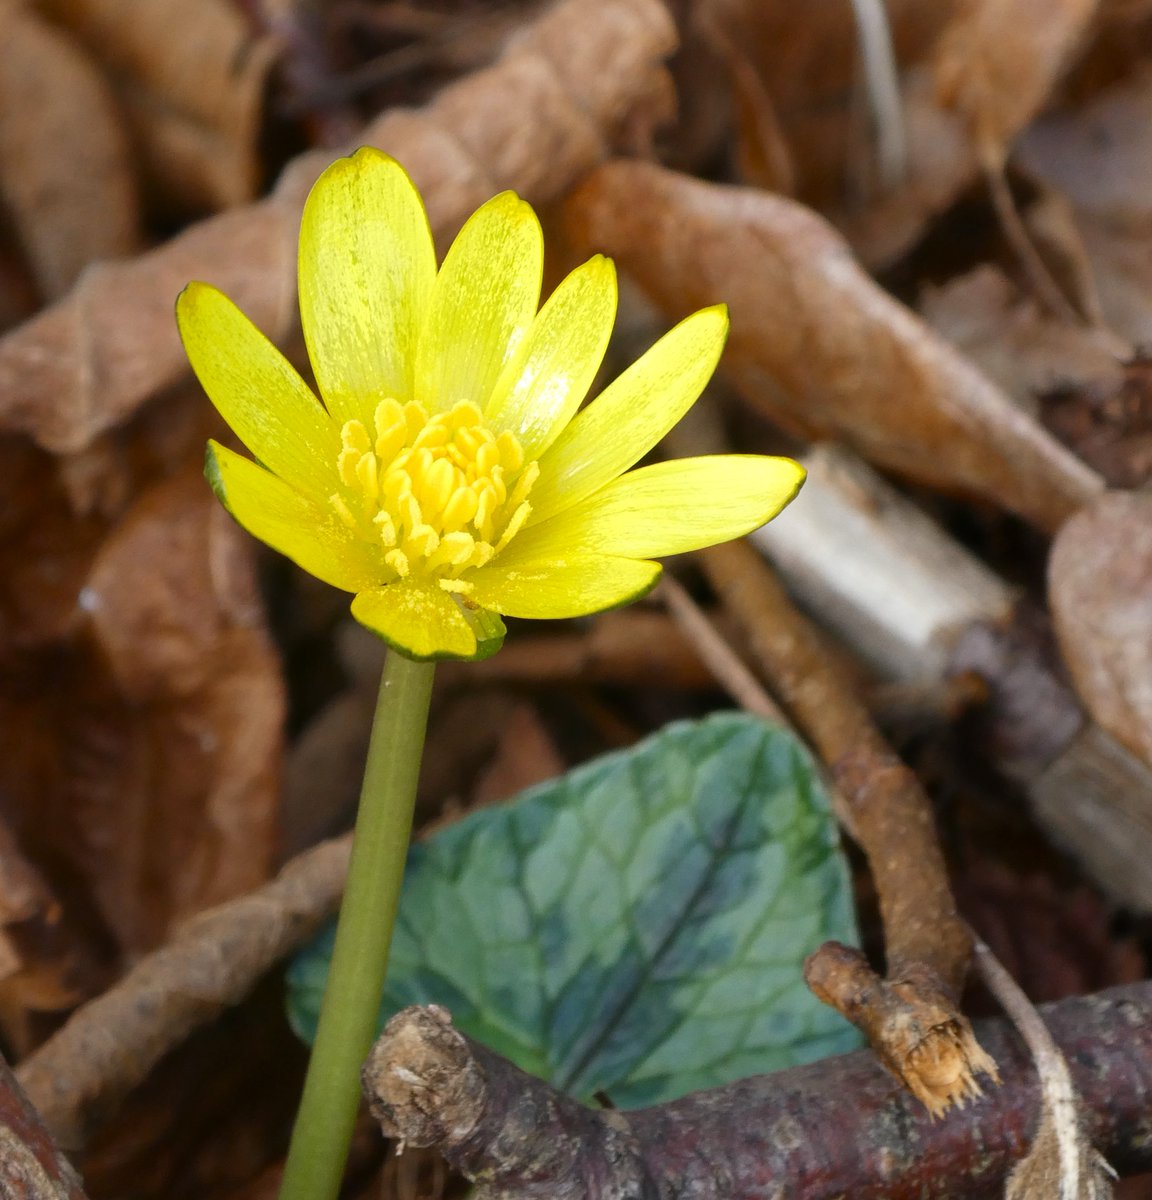 Sunshine in flower form - my first celandine of the year!💛 The flower's name comes from 'chelidonia' (meaning swallow) as its flowering was thought to coincide with the swallow's arrival in the spring💛